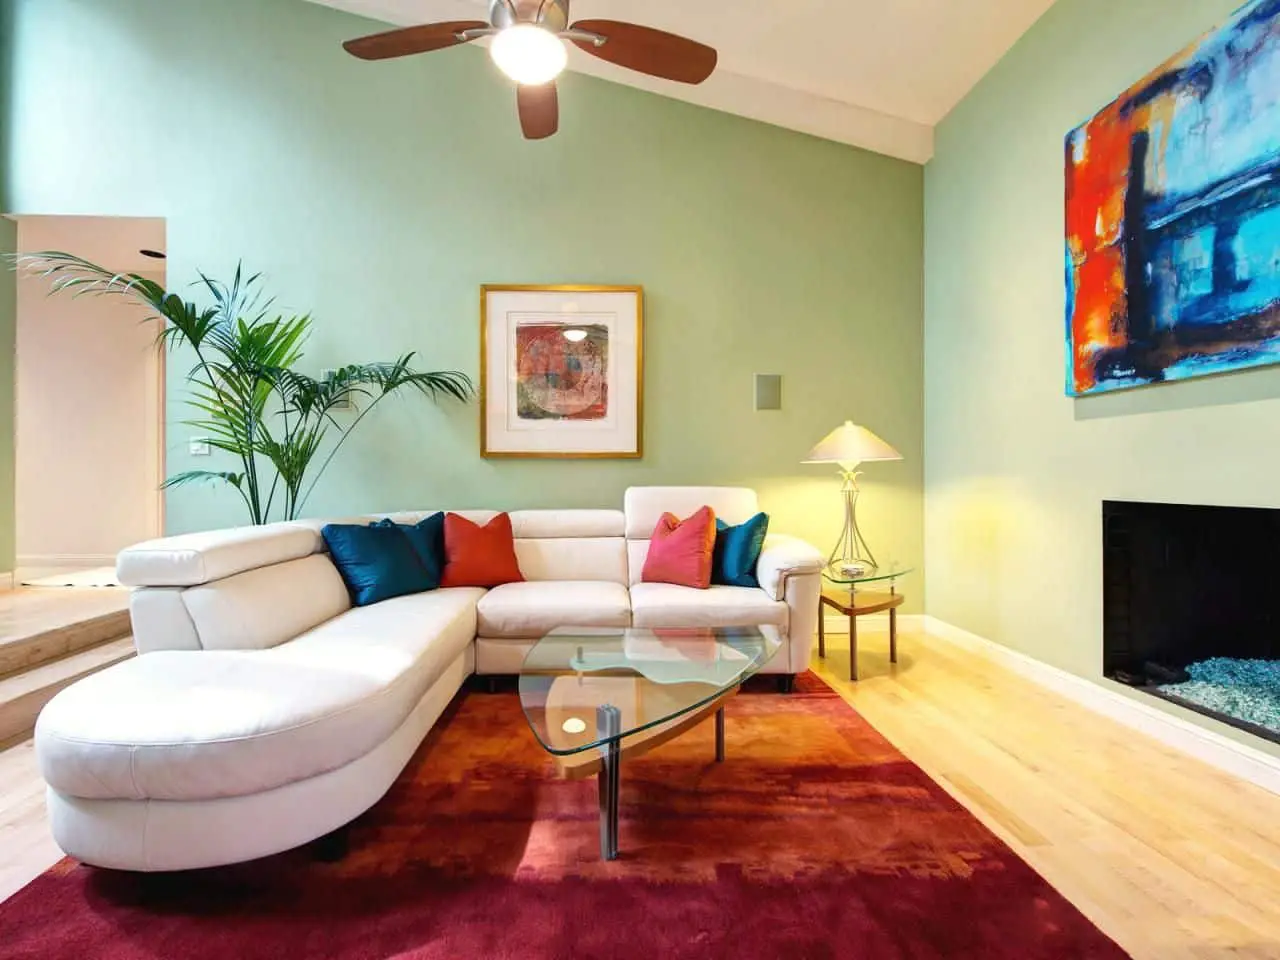 What Color Ceiling Fan For Living Room